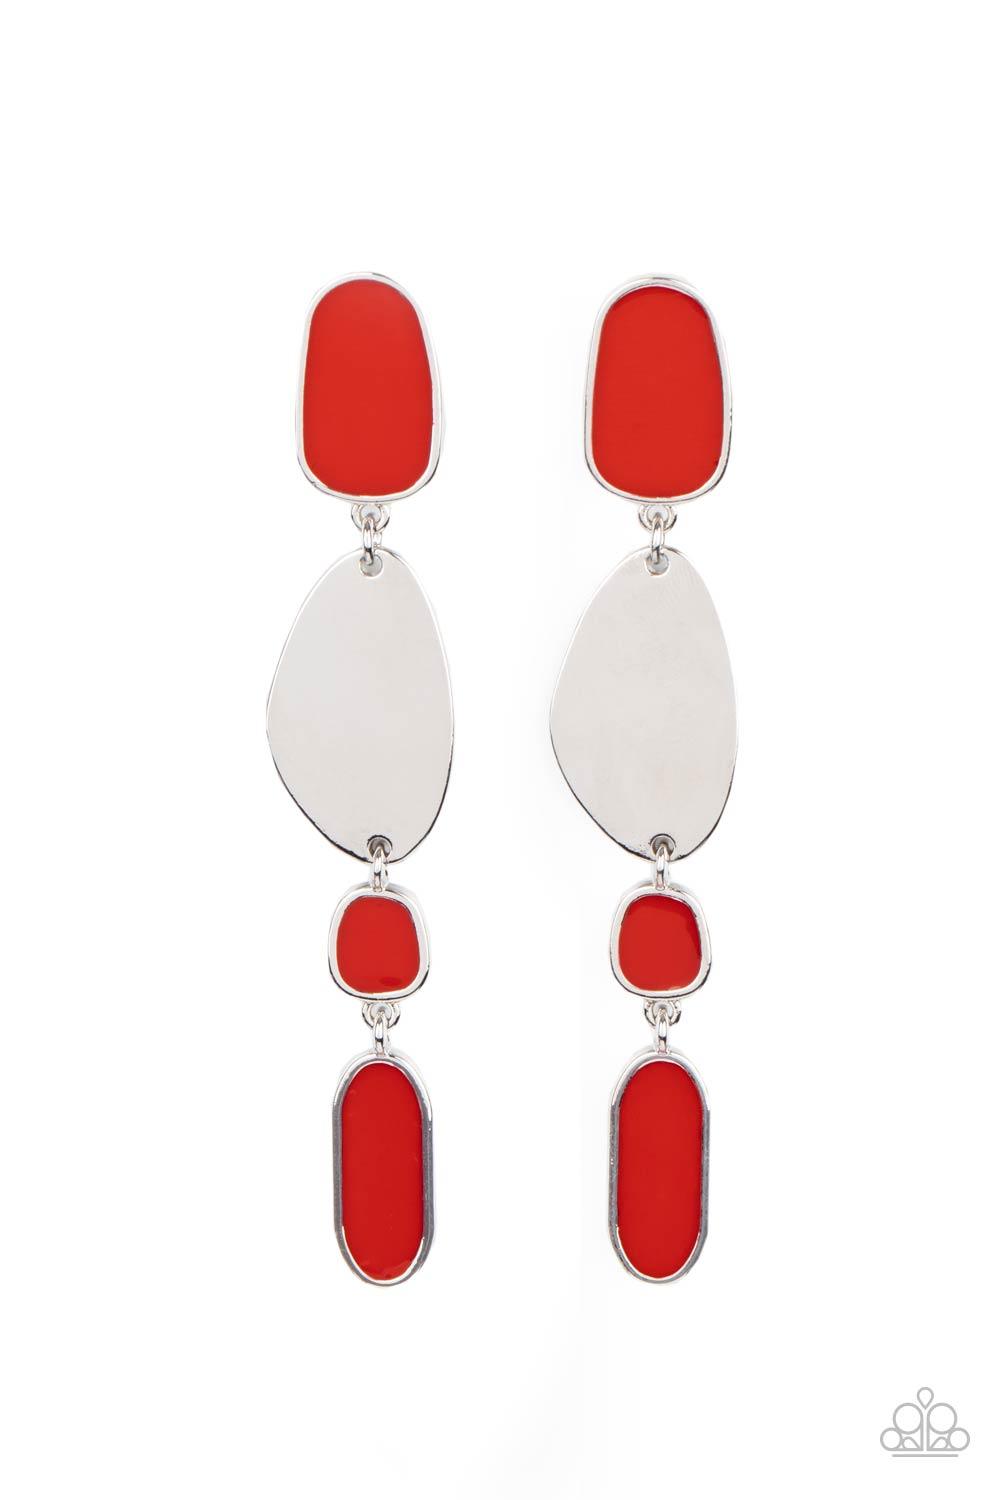 Paparazzi Accessories Deco By Design - Red Painted in a fiery red finish, a shiny collection of asymmetrical frames link with a glistening silver frame, creating an abstract lure. Earring attaches to a standard post fitting. Sold as one pair of post earri